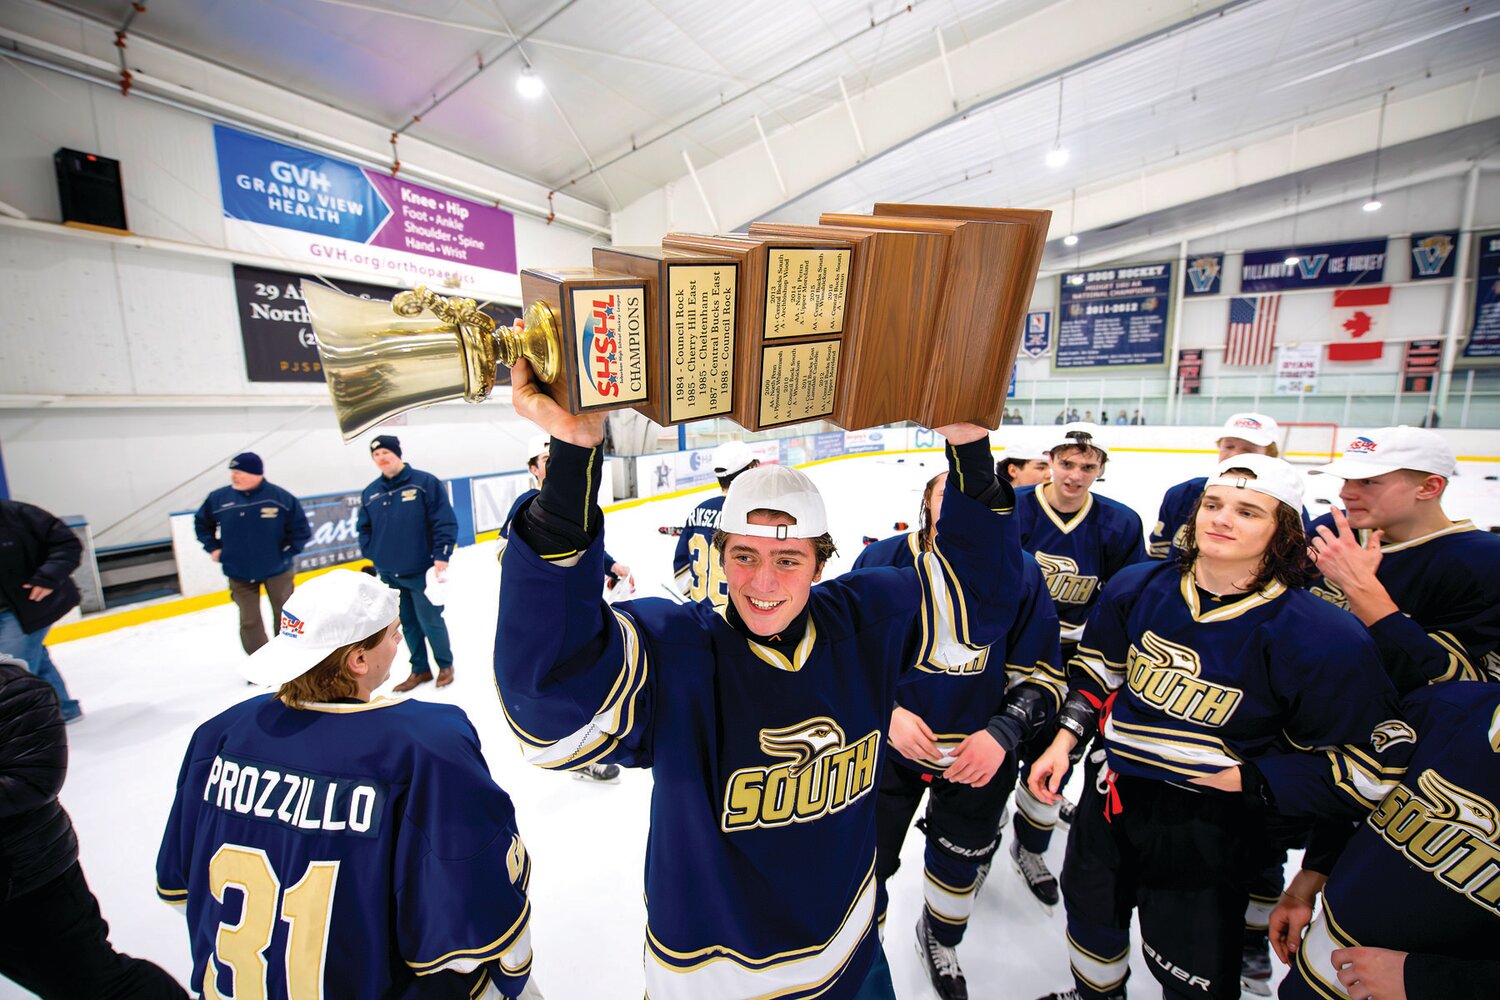 Council Rock South’s James Diiulio skates around after getting the Suburban High School Hockey League trophy.